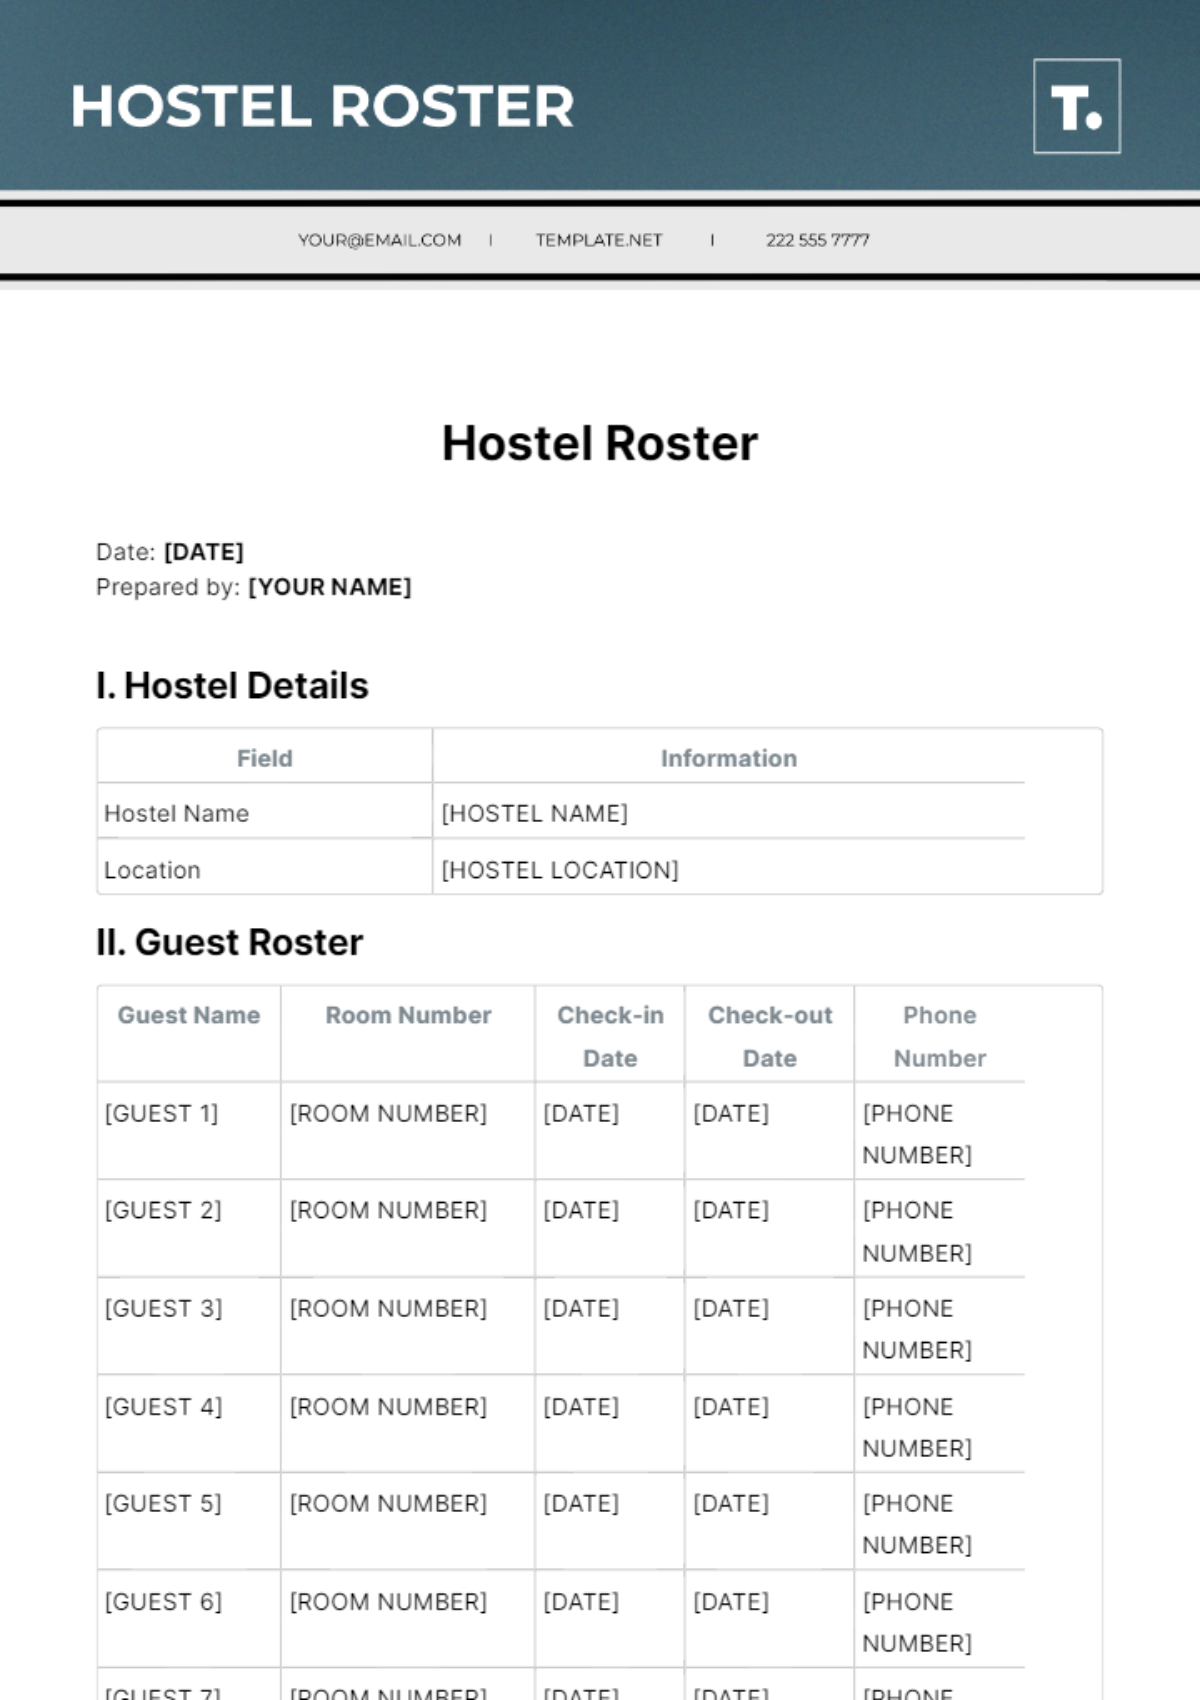 Hostel Roster Template